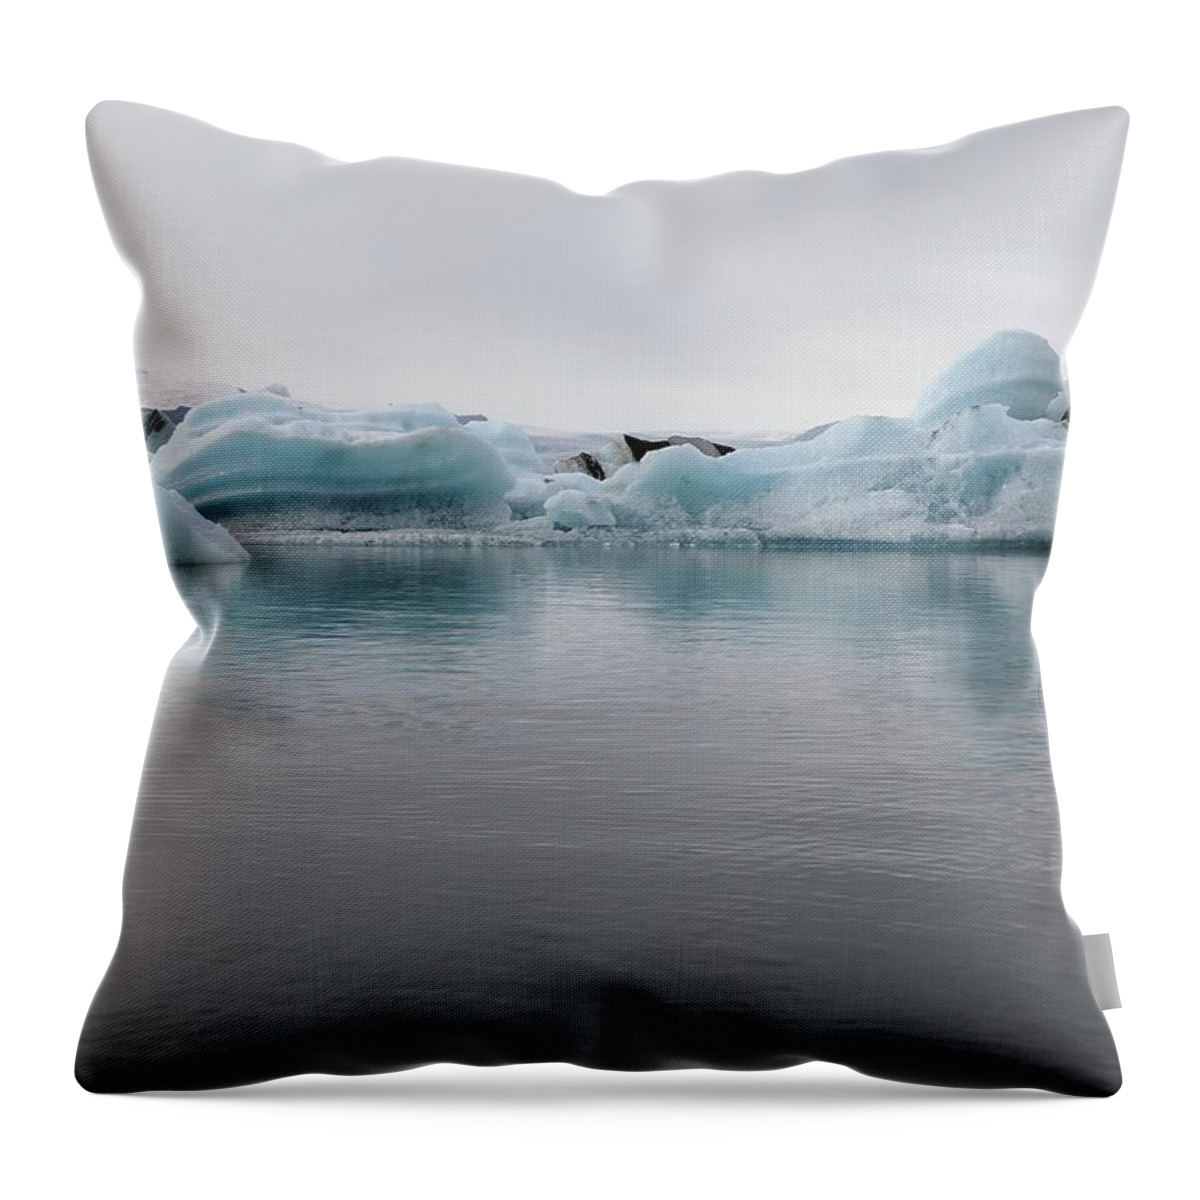 Iceland Throw Pillow featuring the photograph Iceland Glacier by Yvonne Jasinski